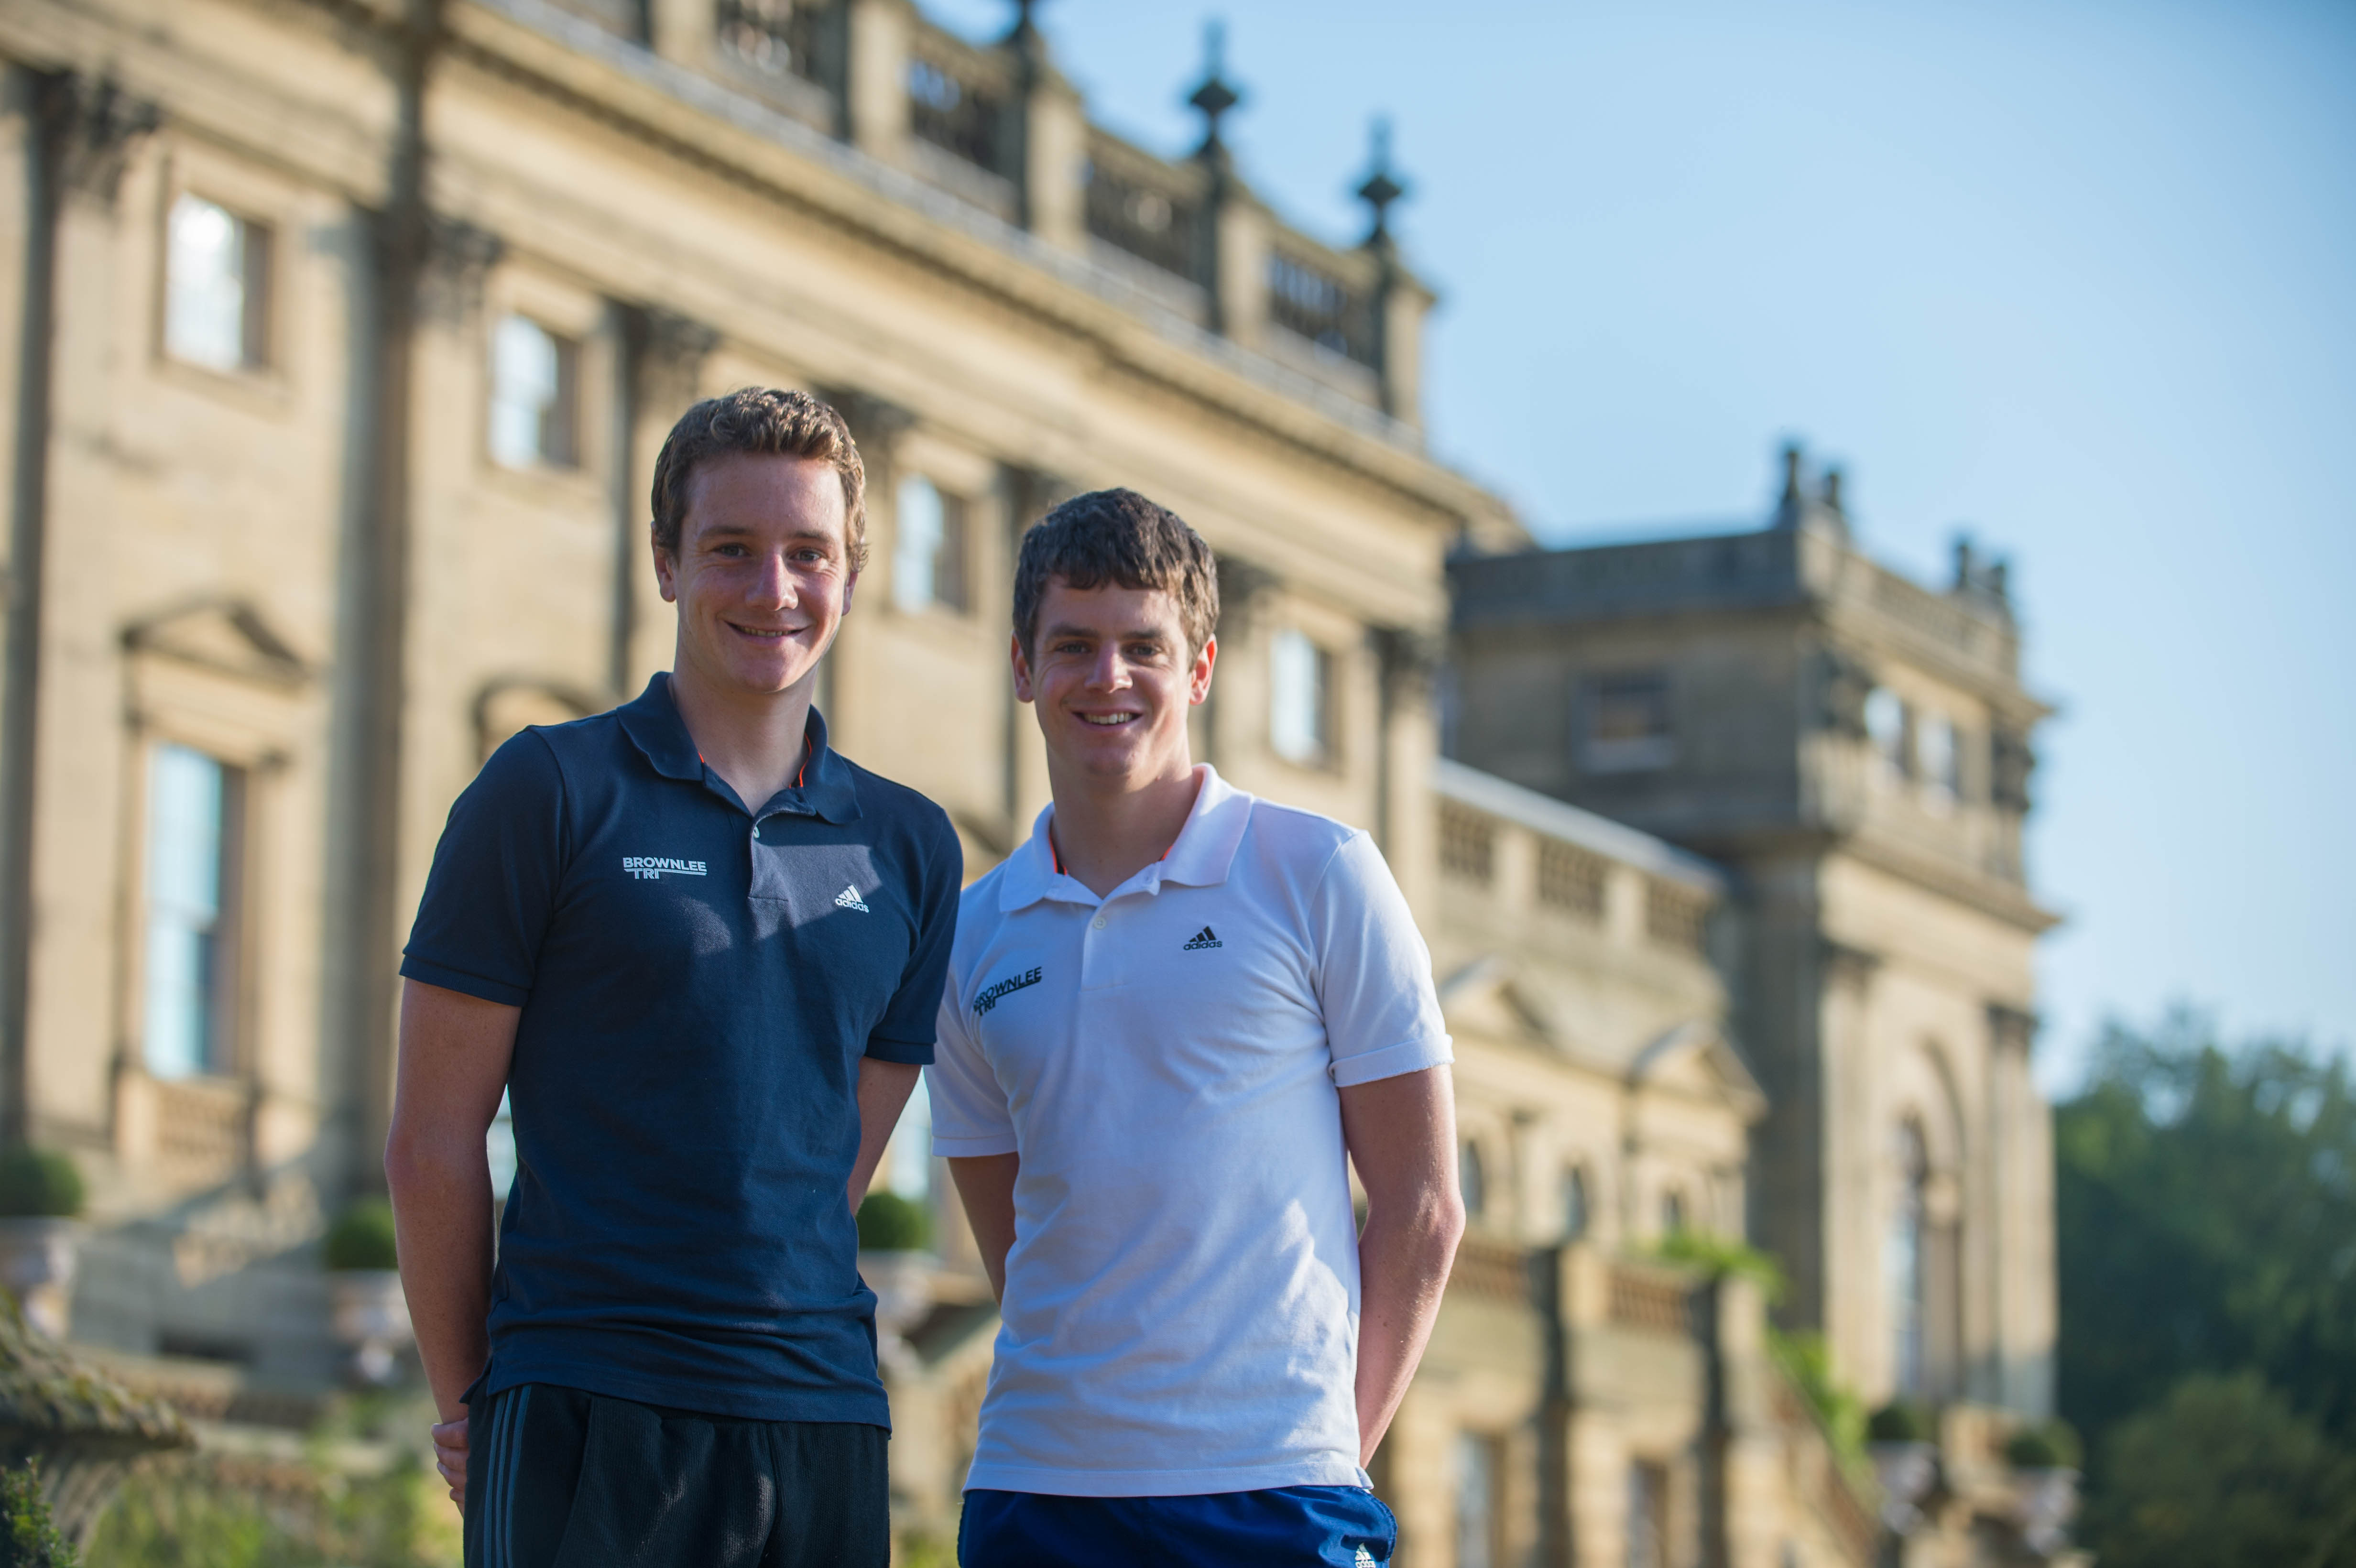 Visit Harewood to see Ali and Jonny Brownlee